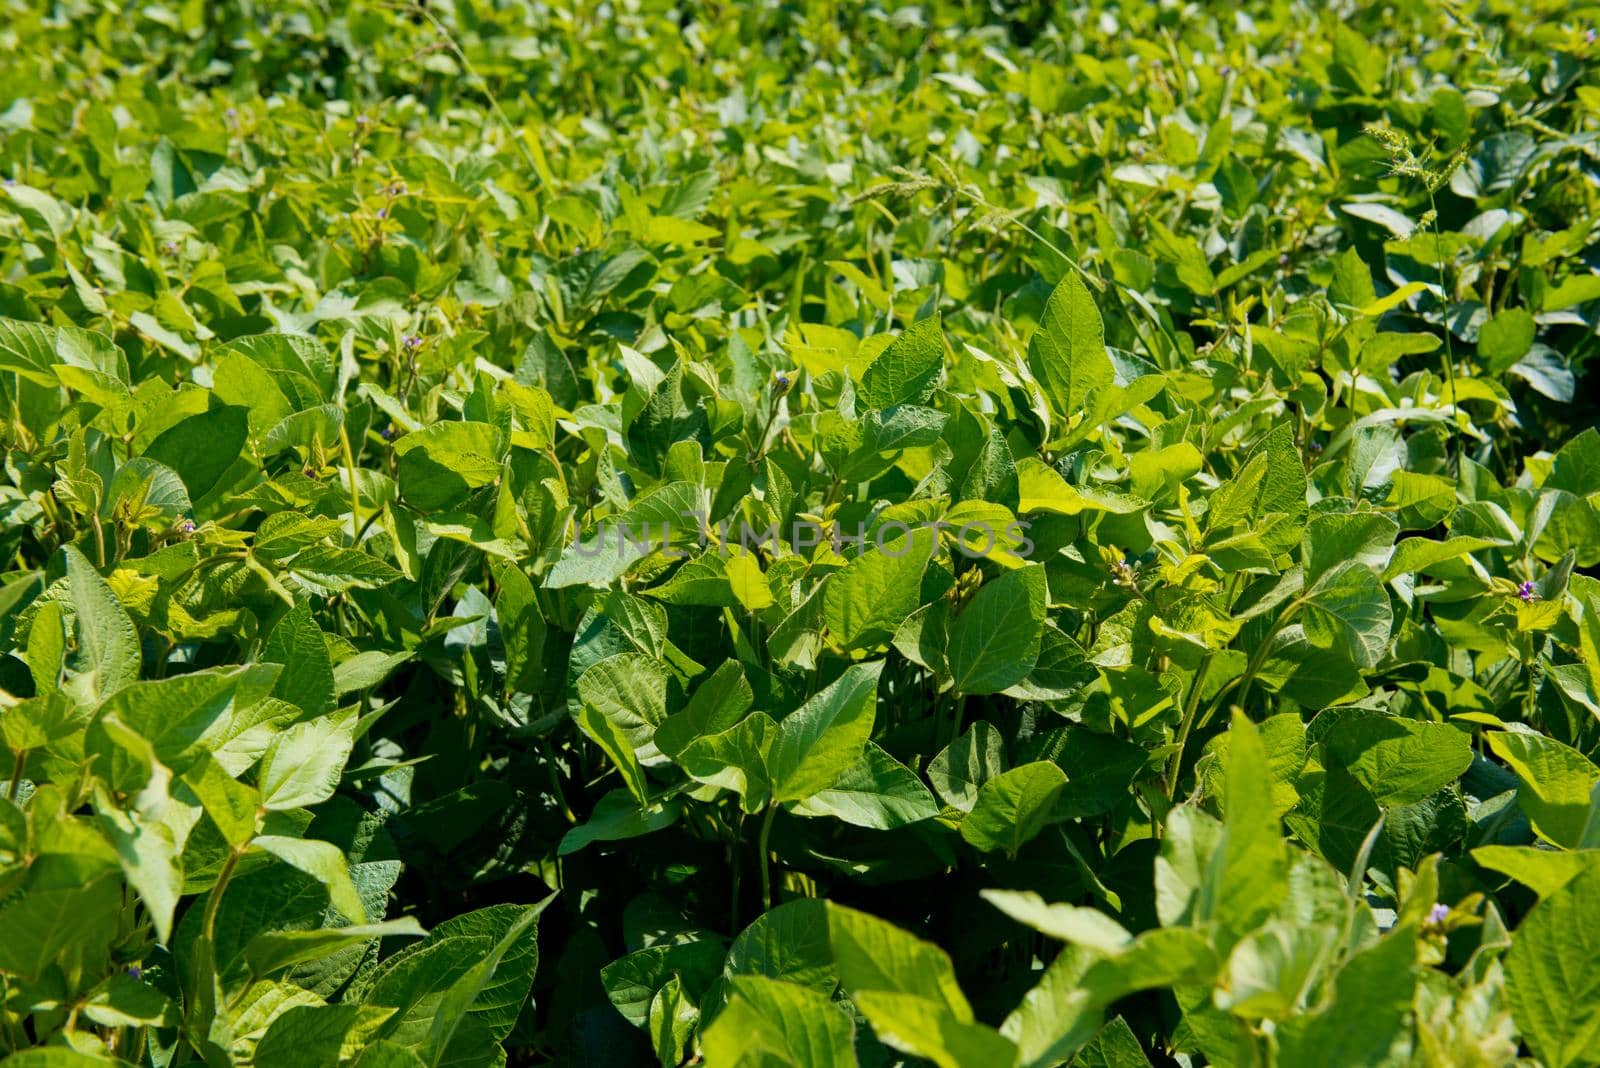 Soy leaves close-up. Sprouts of young soybeans on the field.